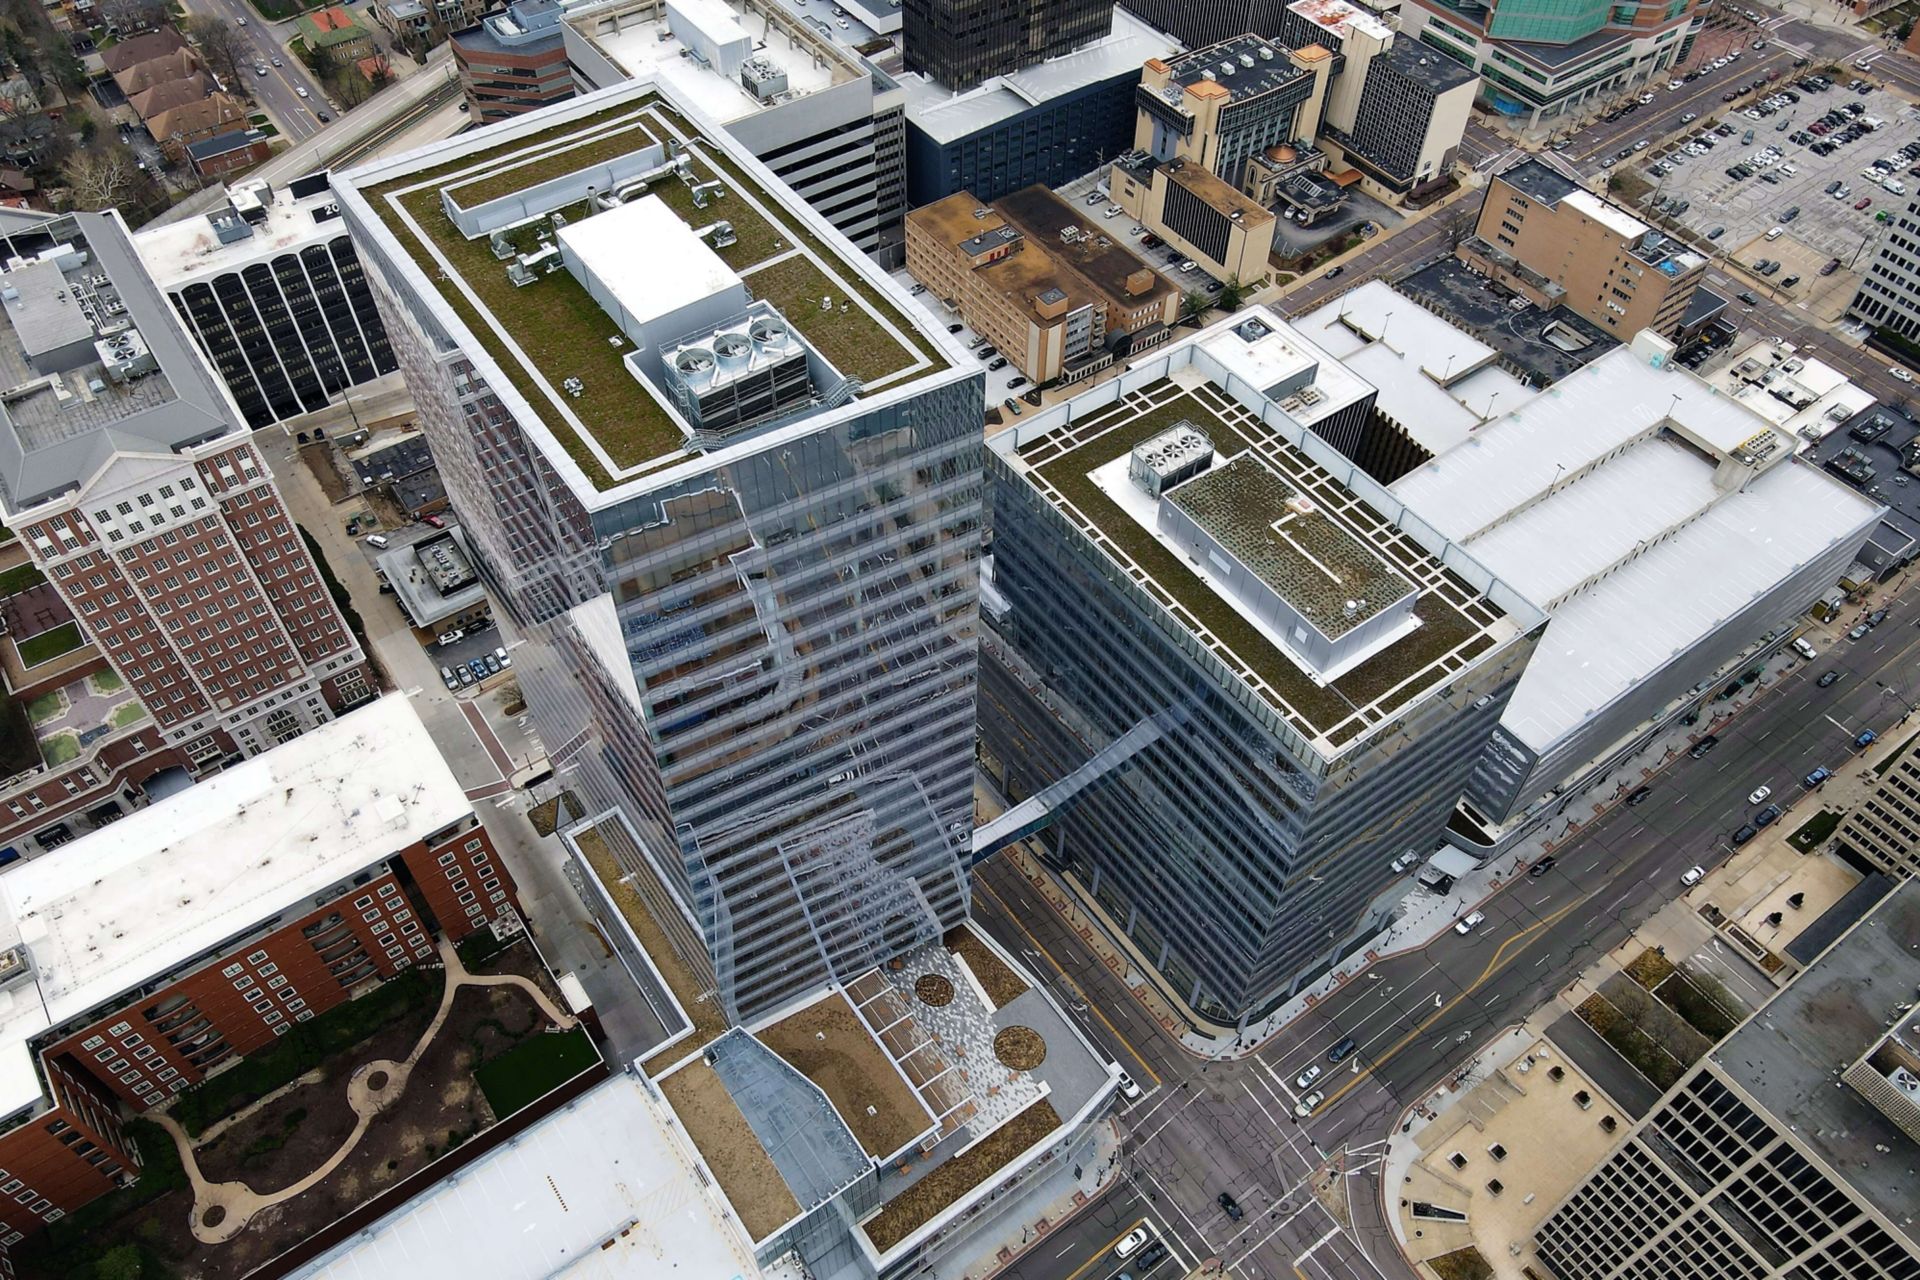 Centene Plaza building shown with a green roof on a skyscraper building. 